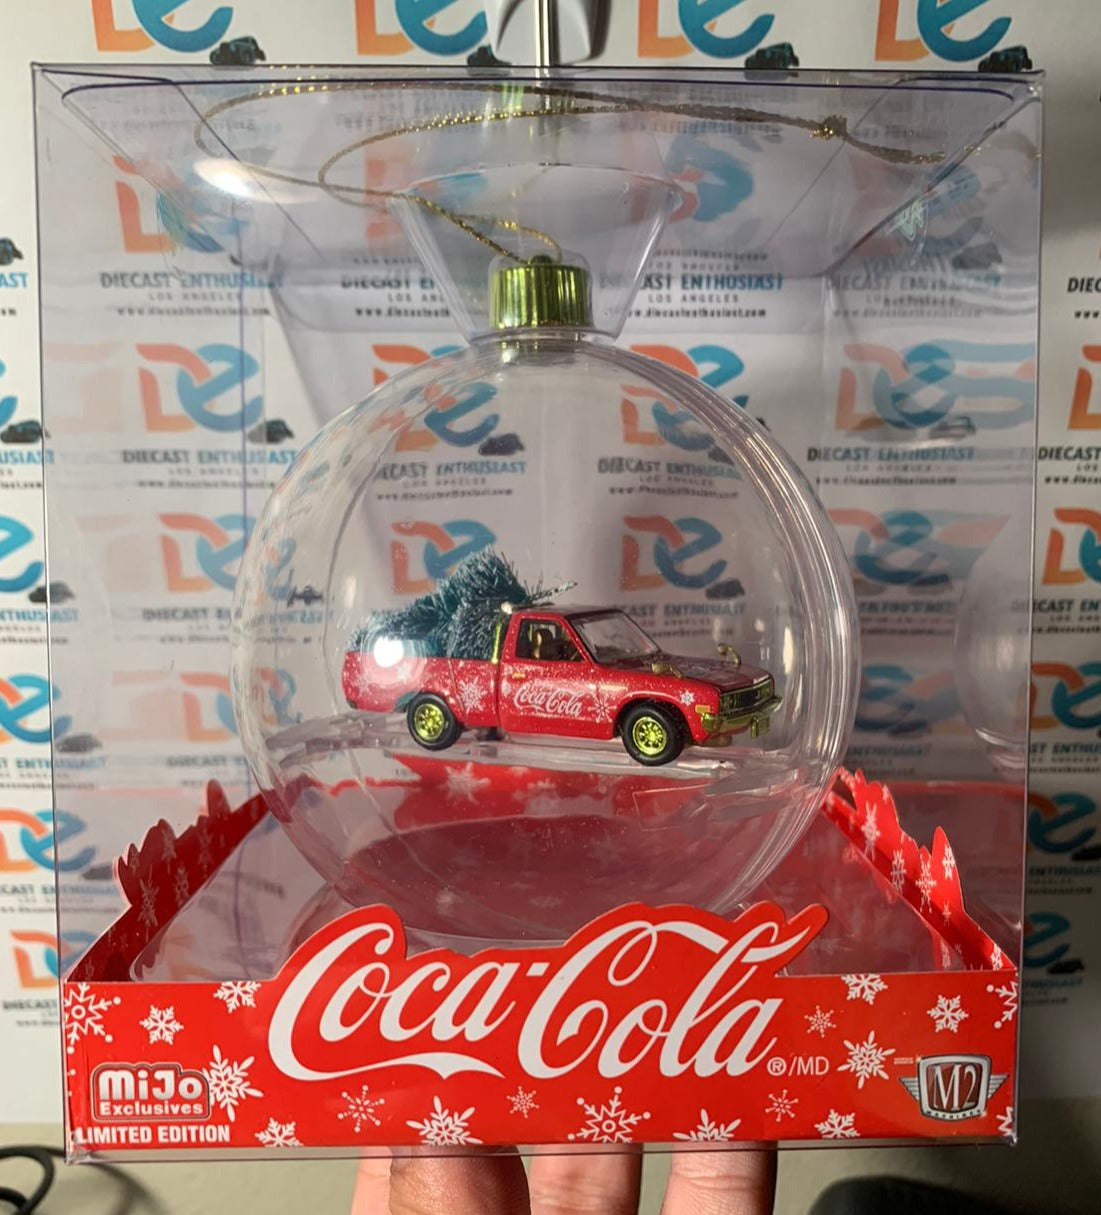 CHASE M2 Machines Mijo Exclusive Christmas Edition Datsun 620 Pickup 1/64